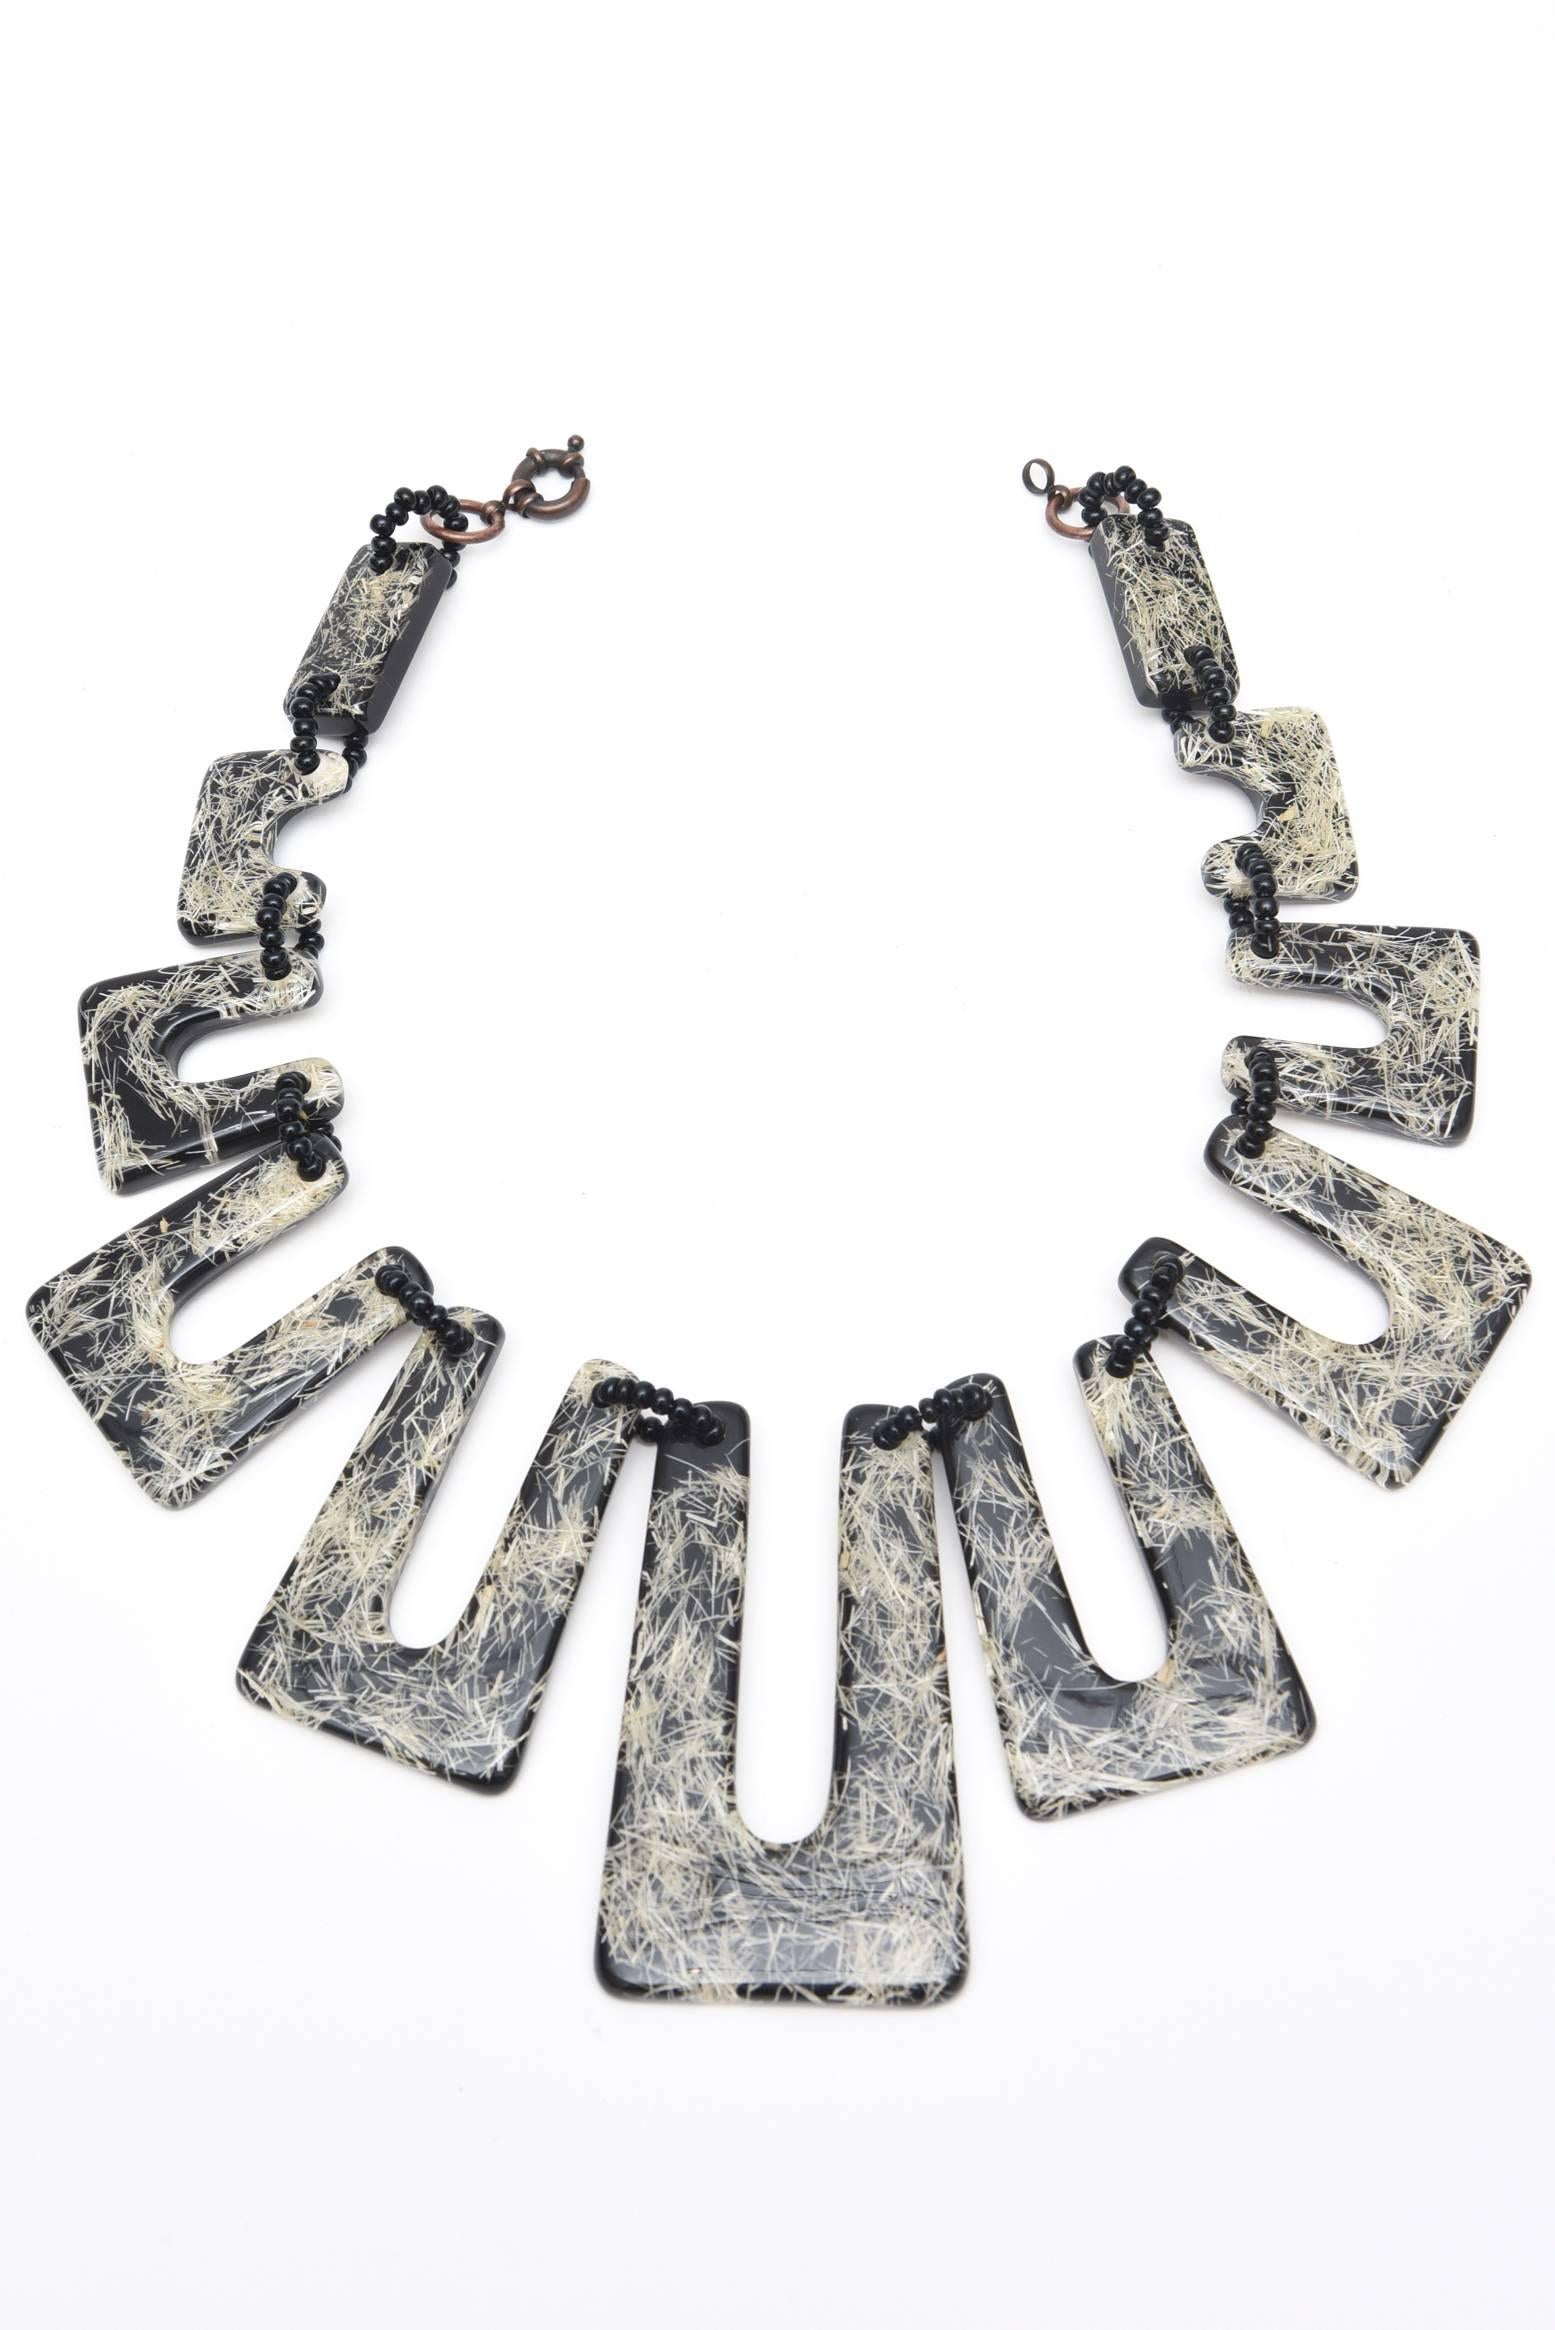 The graphic and painterly black and white resin french necklace of 9 graduated inverted U's has inspirations from the renowned and collectable painter: Jackson Pollack. This is artful and dramatic and looks great against all colors. There are small